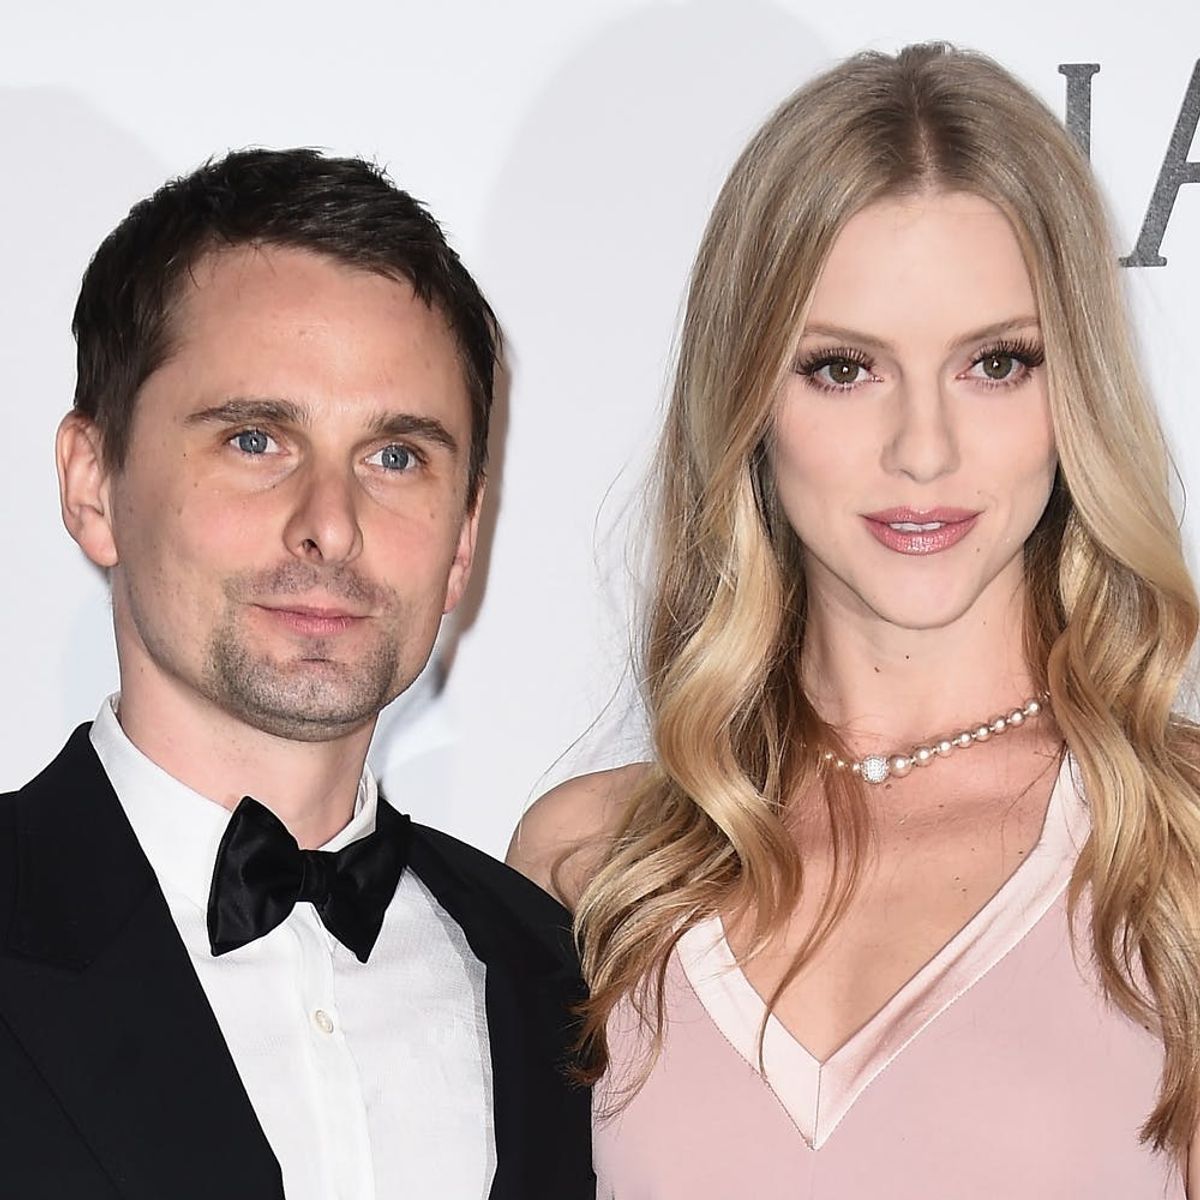 Muse Singer Matthew Bellamy Is Engaged to Elle Evans: See the Stunning Ring!